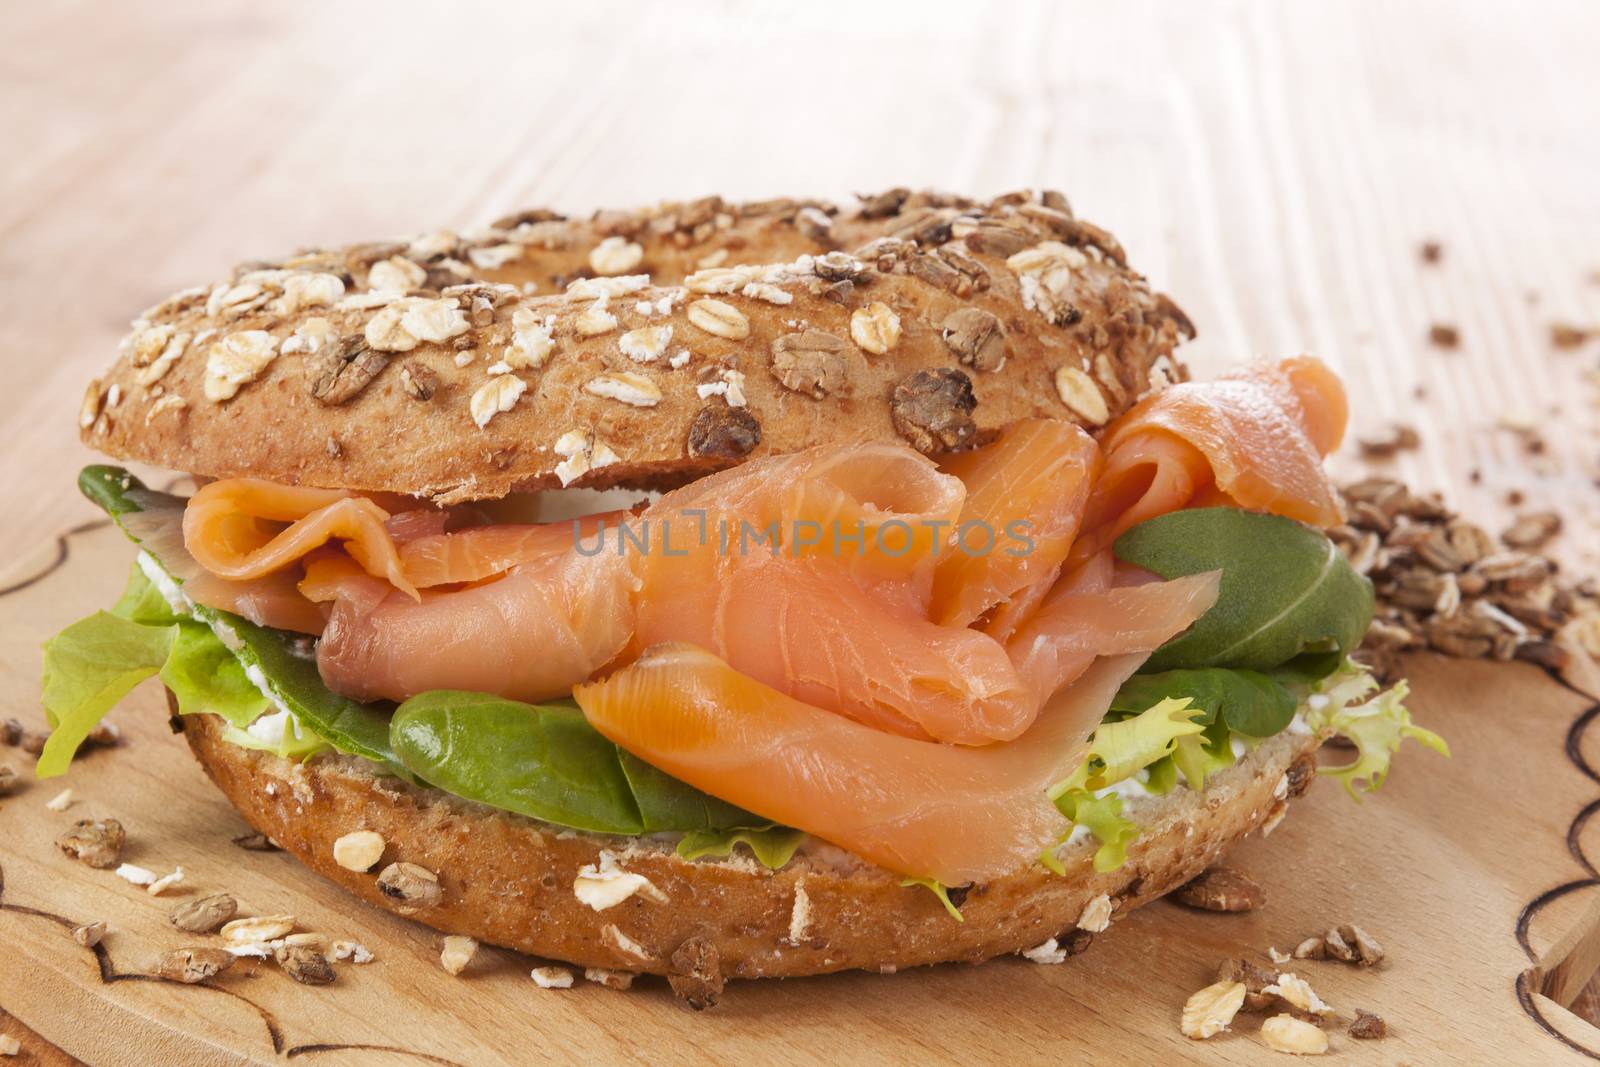 Whole grain bagel with smoked salmon on wooden background. Culinary healthy bagel eating.